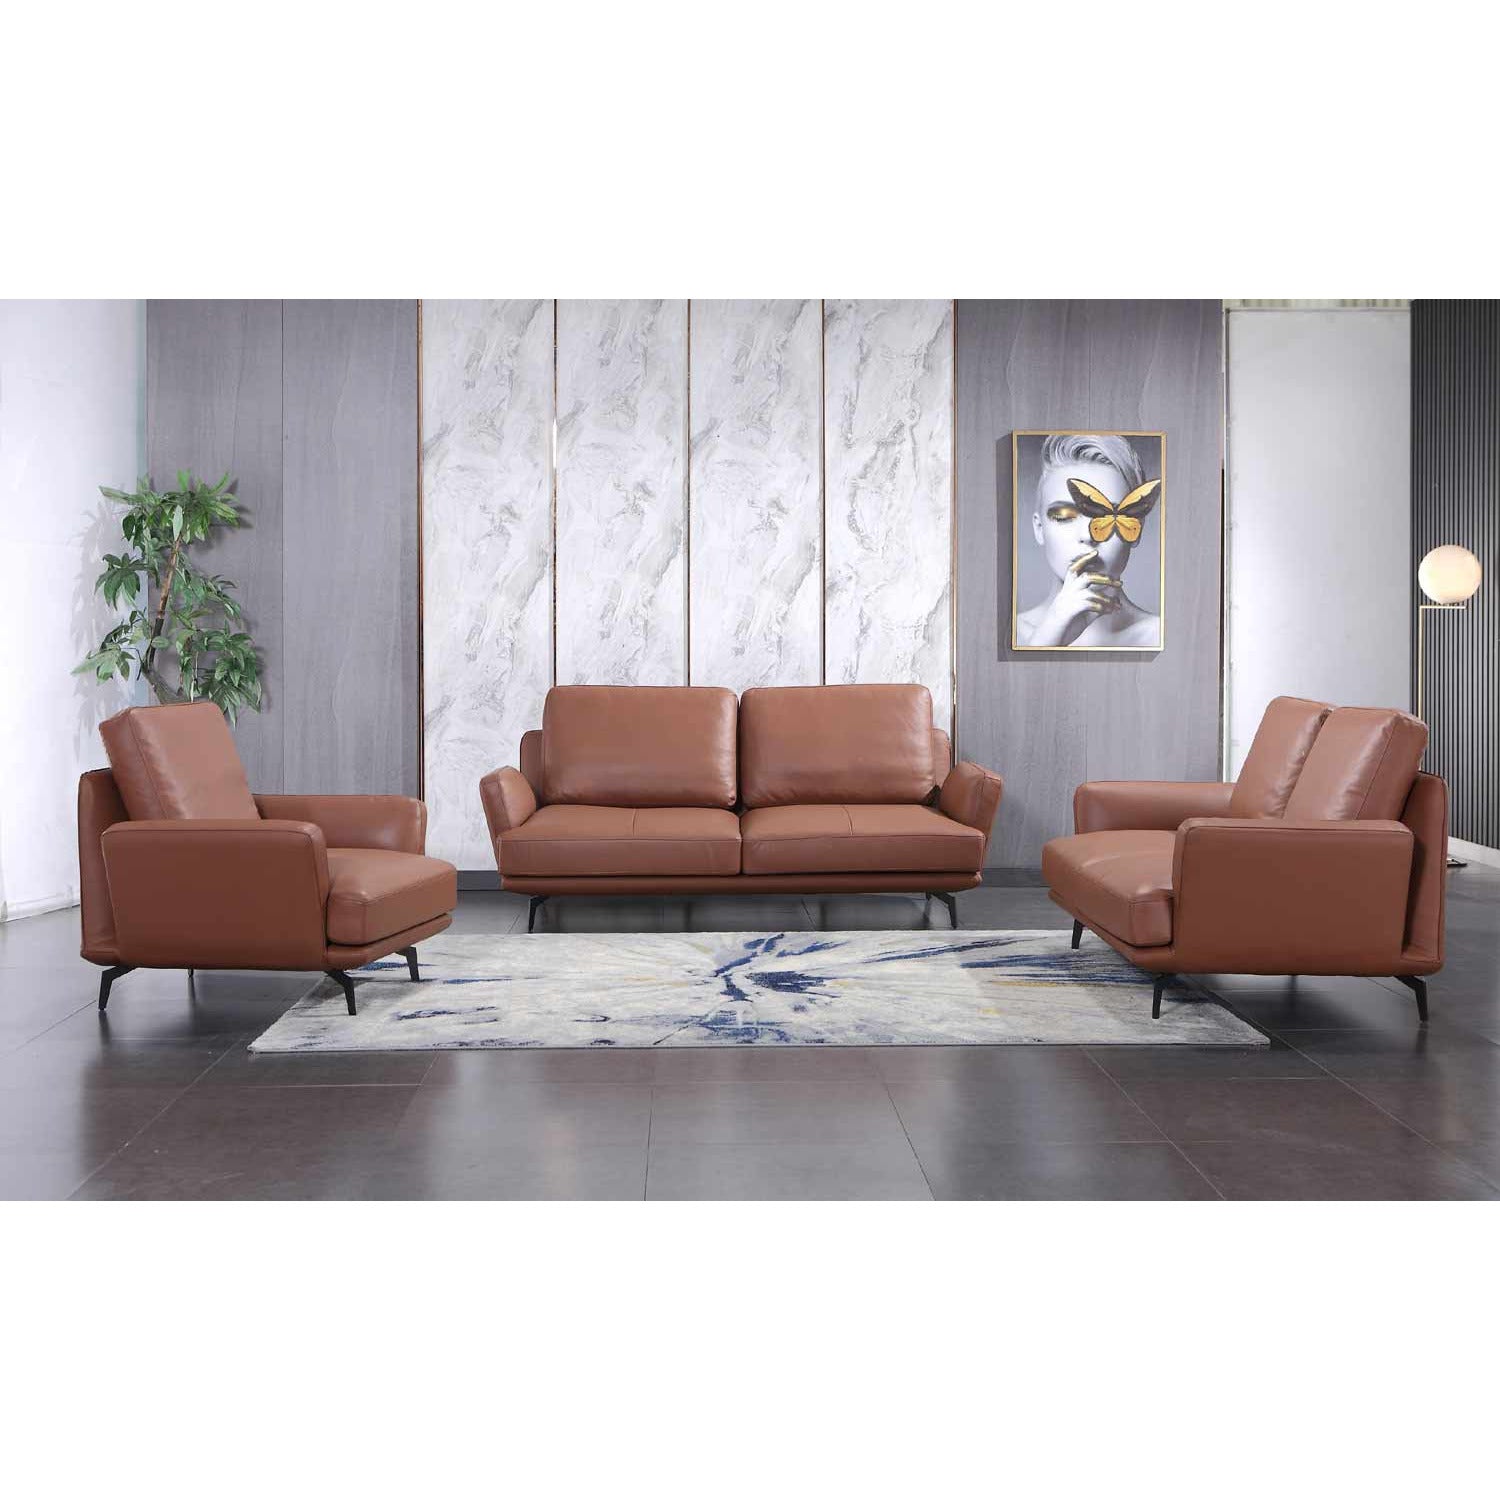 European Furniture - Tratto Sofa in Russet Brown - 37455-S - New Star Living